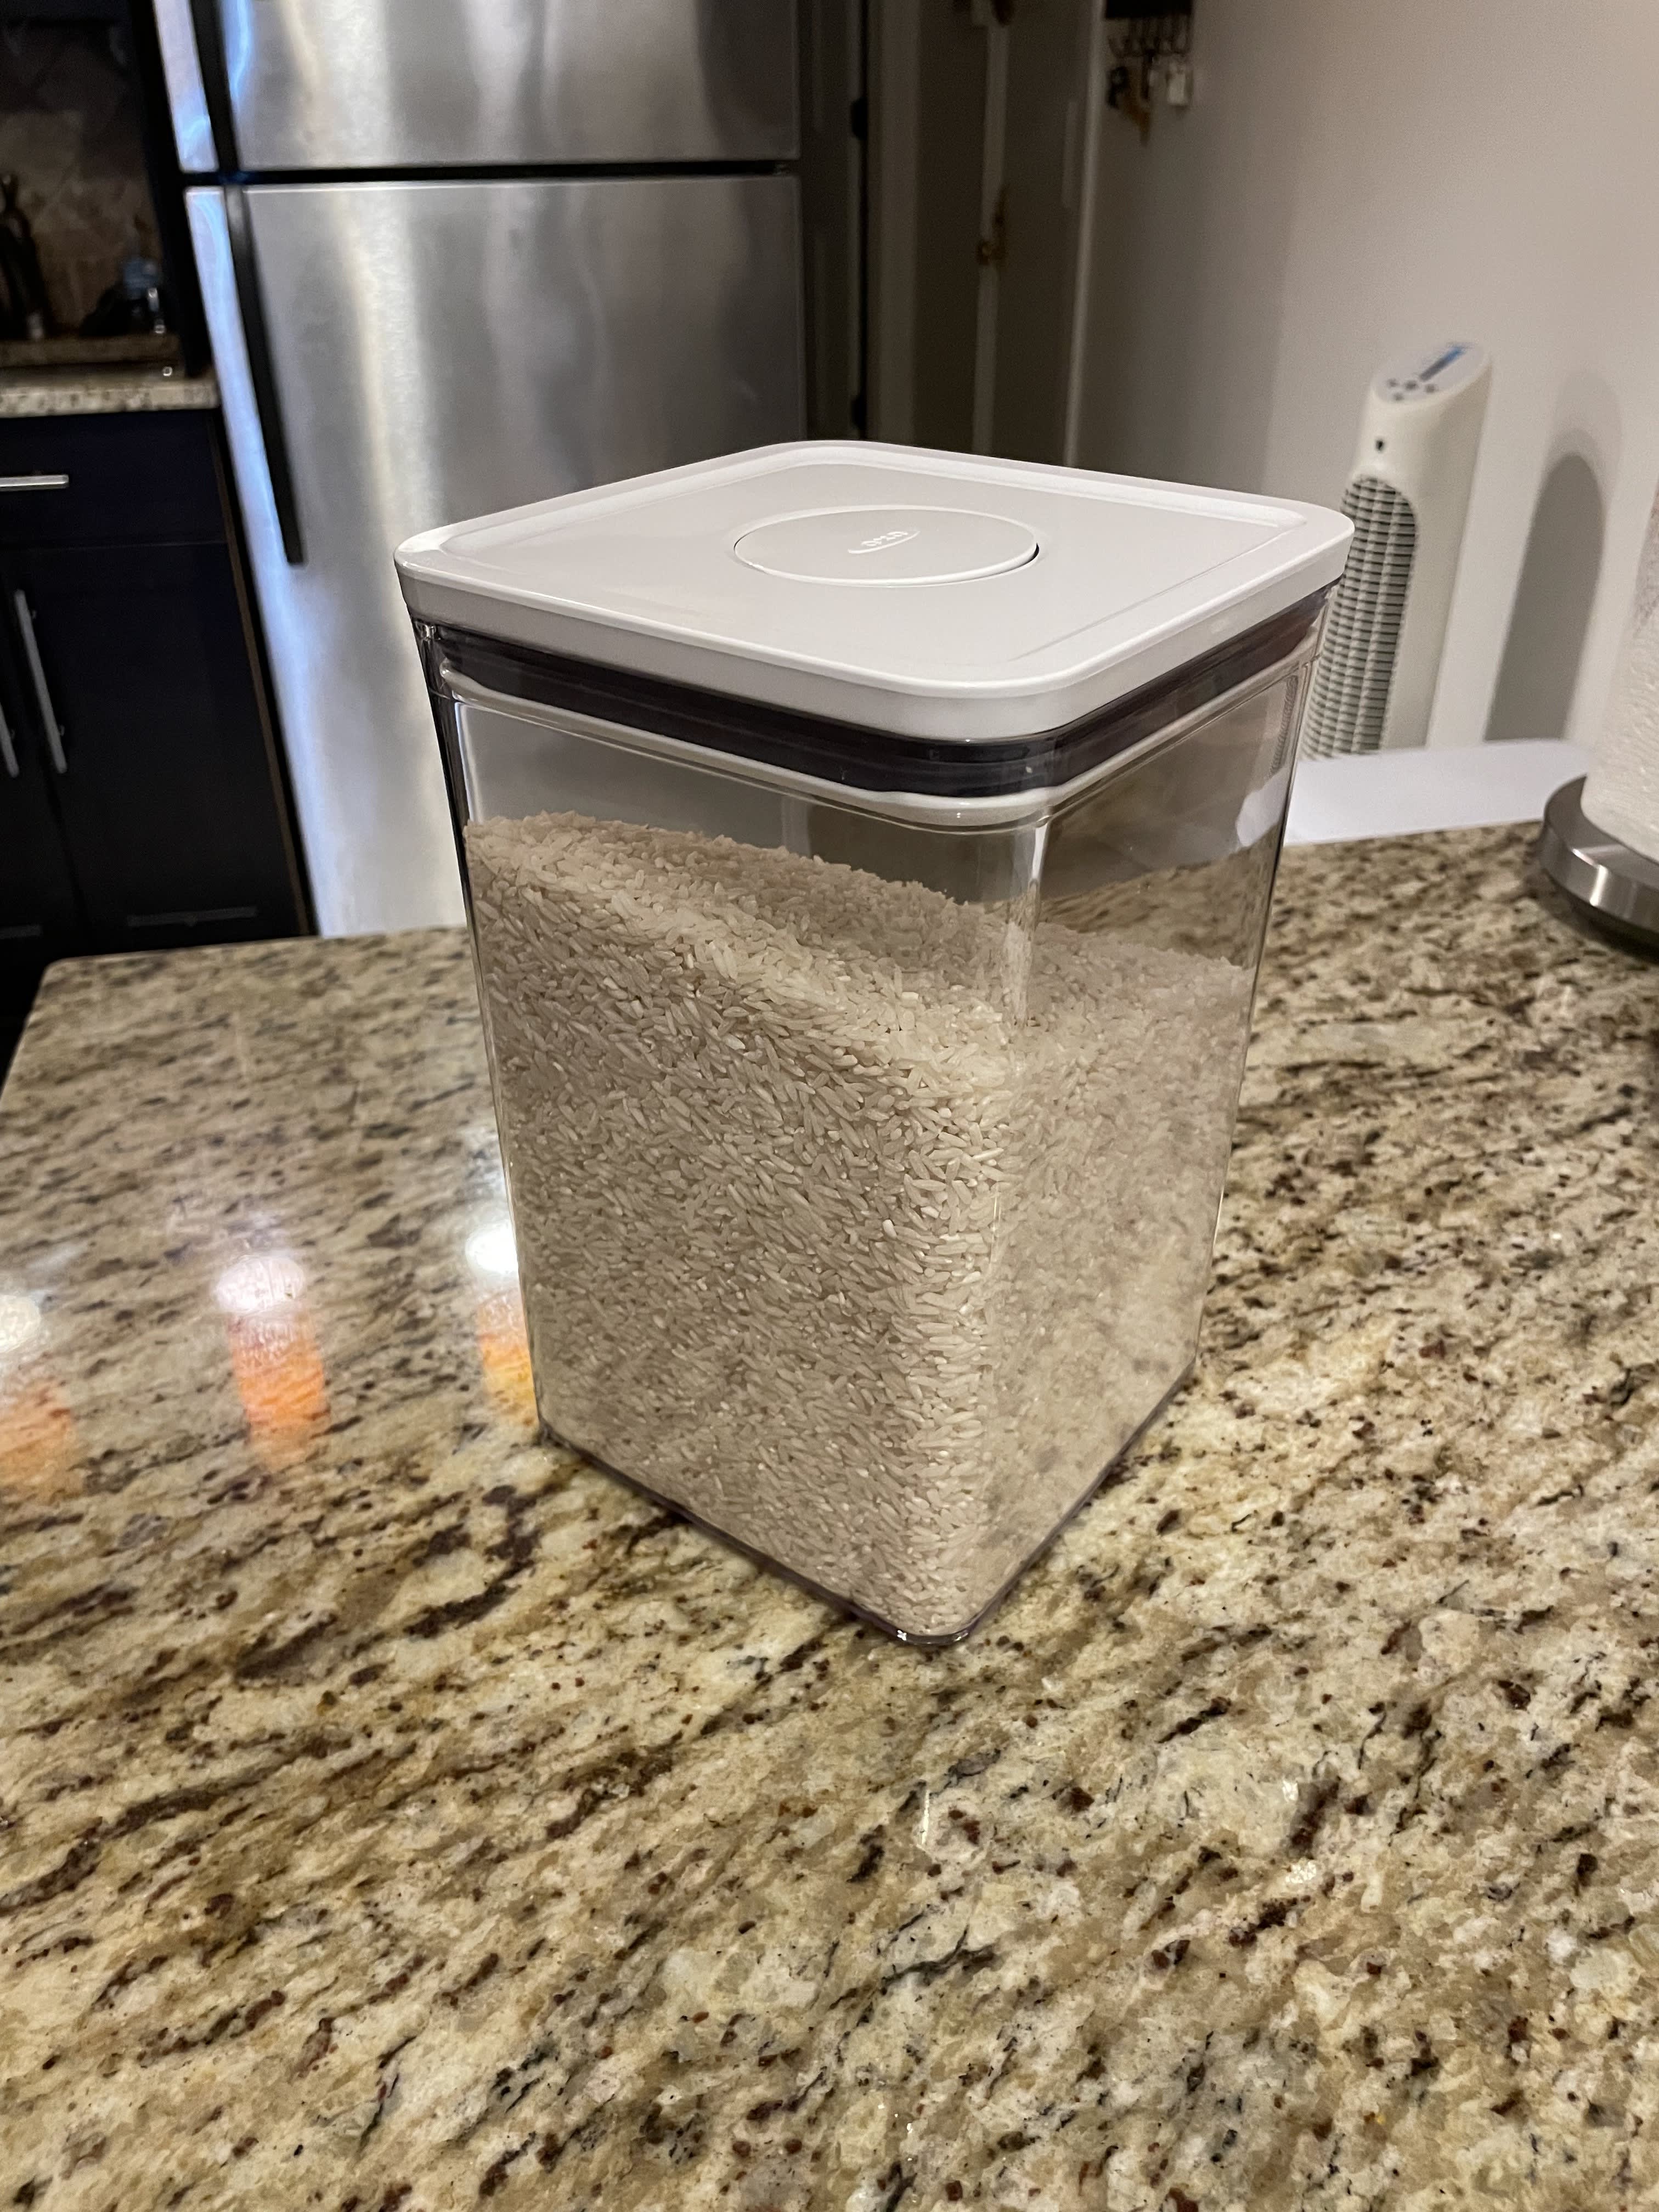 https://cdn.apartmenttherapy.info/image/upload/v1680107186/commerce/oxo-pop-container-rice.jpg